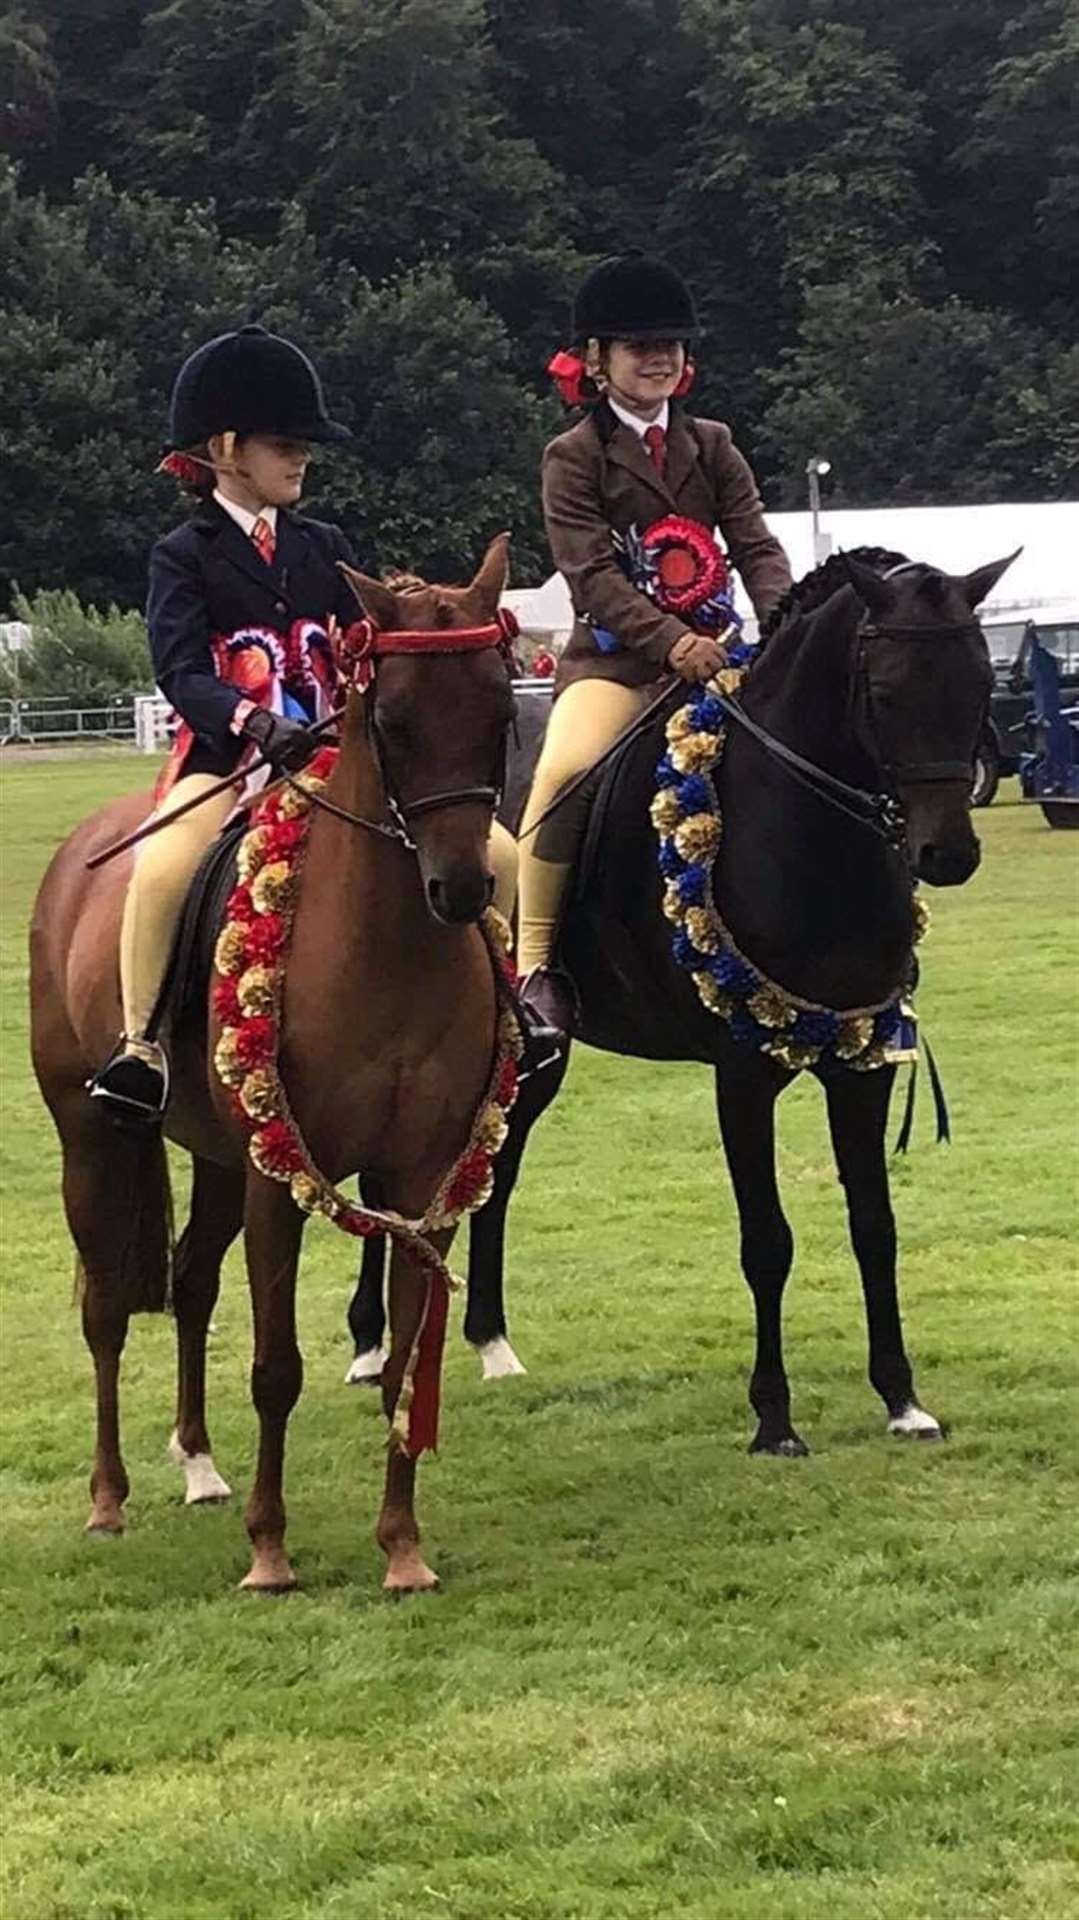 Both Leoni Kennedy's ponies are pictured here with their supreme awards at the Turriff Show. Leoni can be seen on the right with Shanrye Finlay, the reserve supreme ridden horse, and her friend Iona Wynne from Ballater is on the left with the supreme champion Popalbee Minnie Mouse.